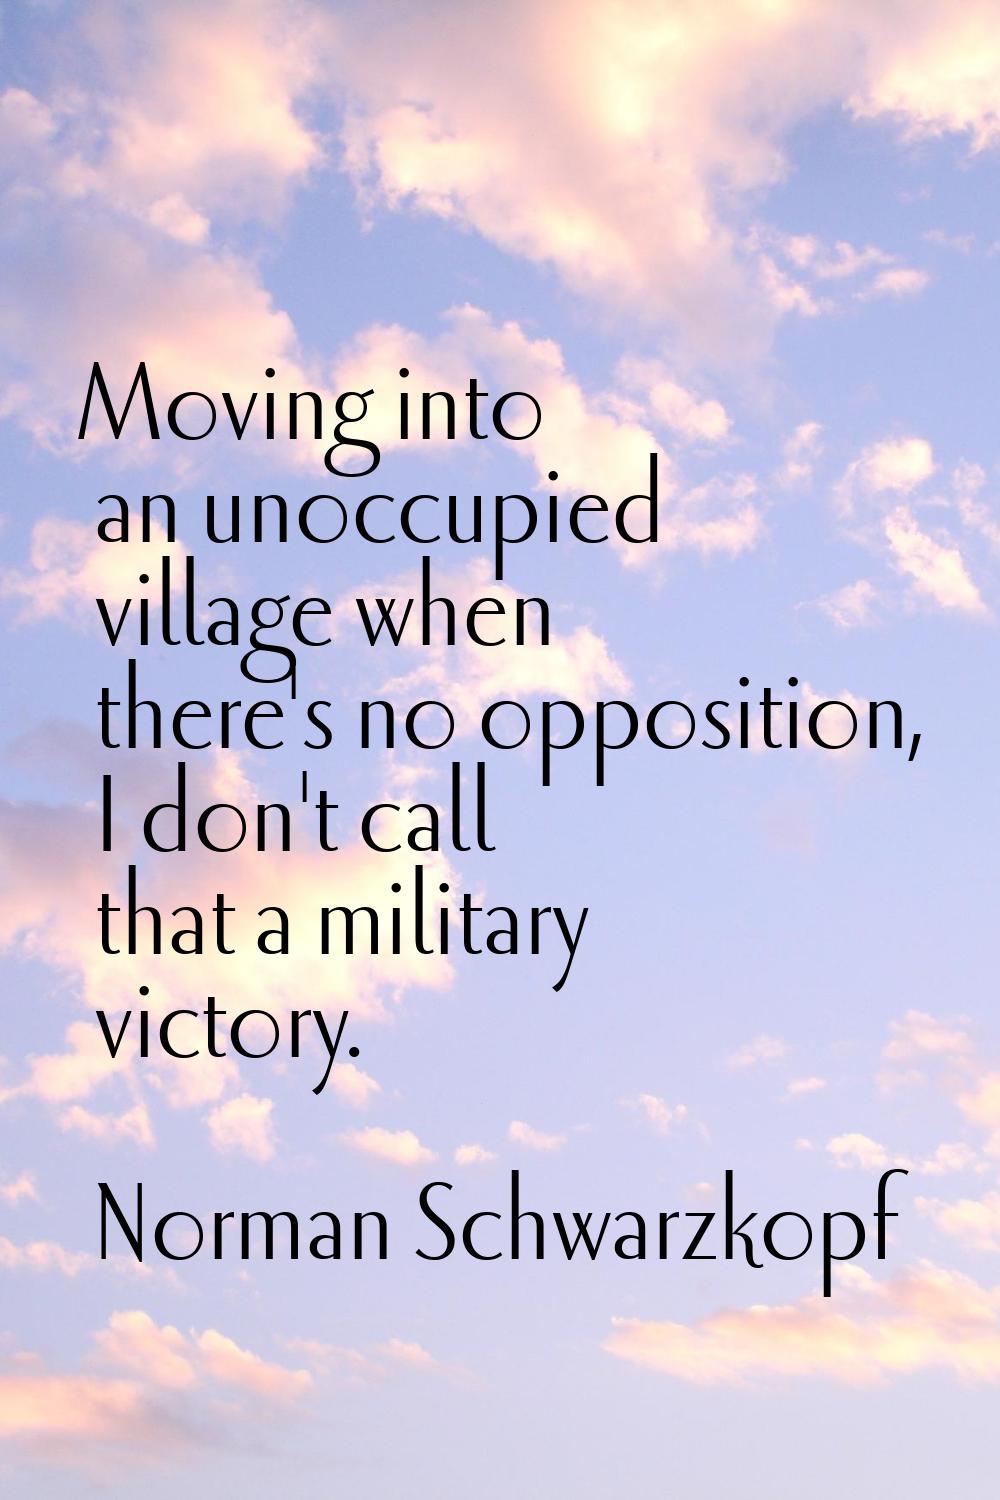 Moving into an unoccupied village when there's no opposition, I don't call that a military victory.